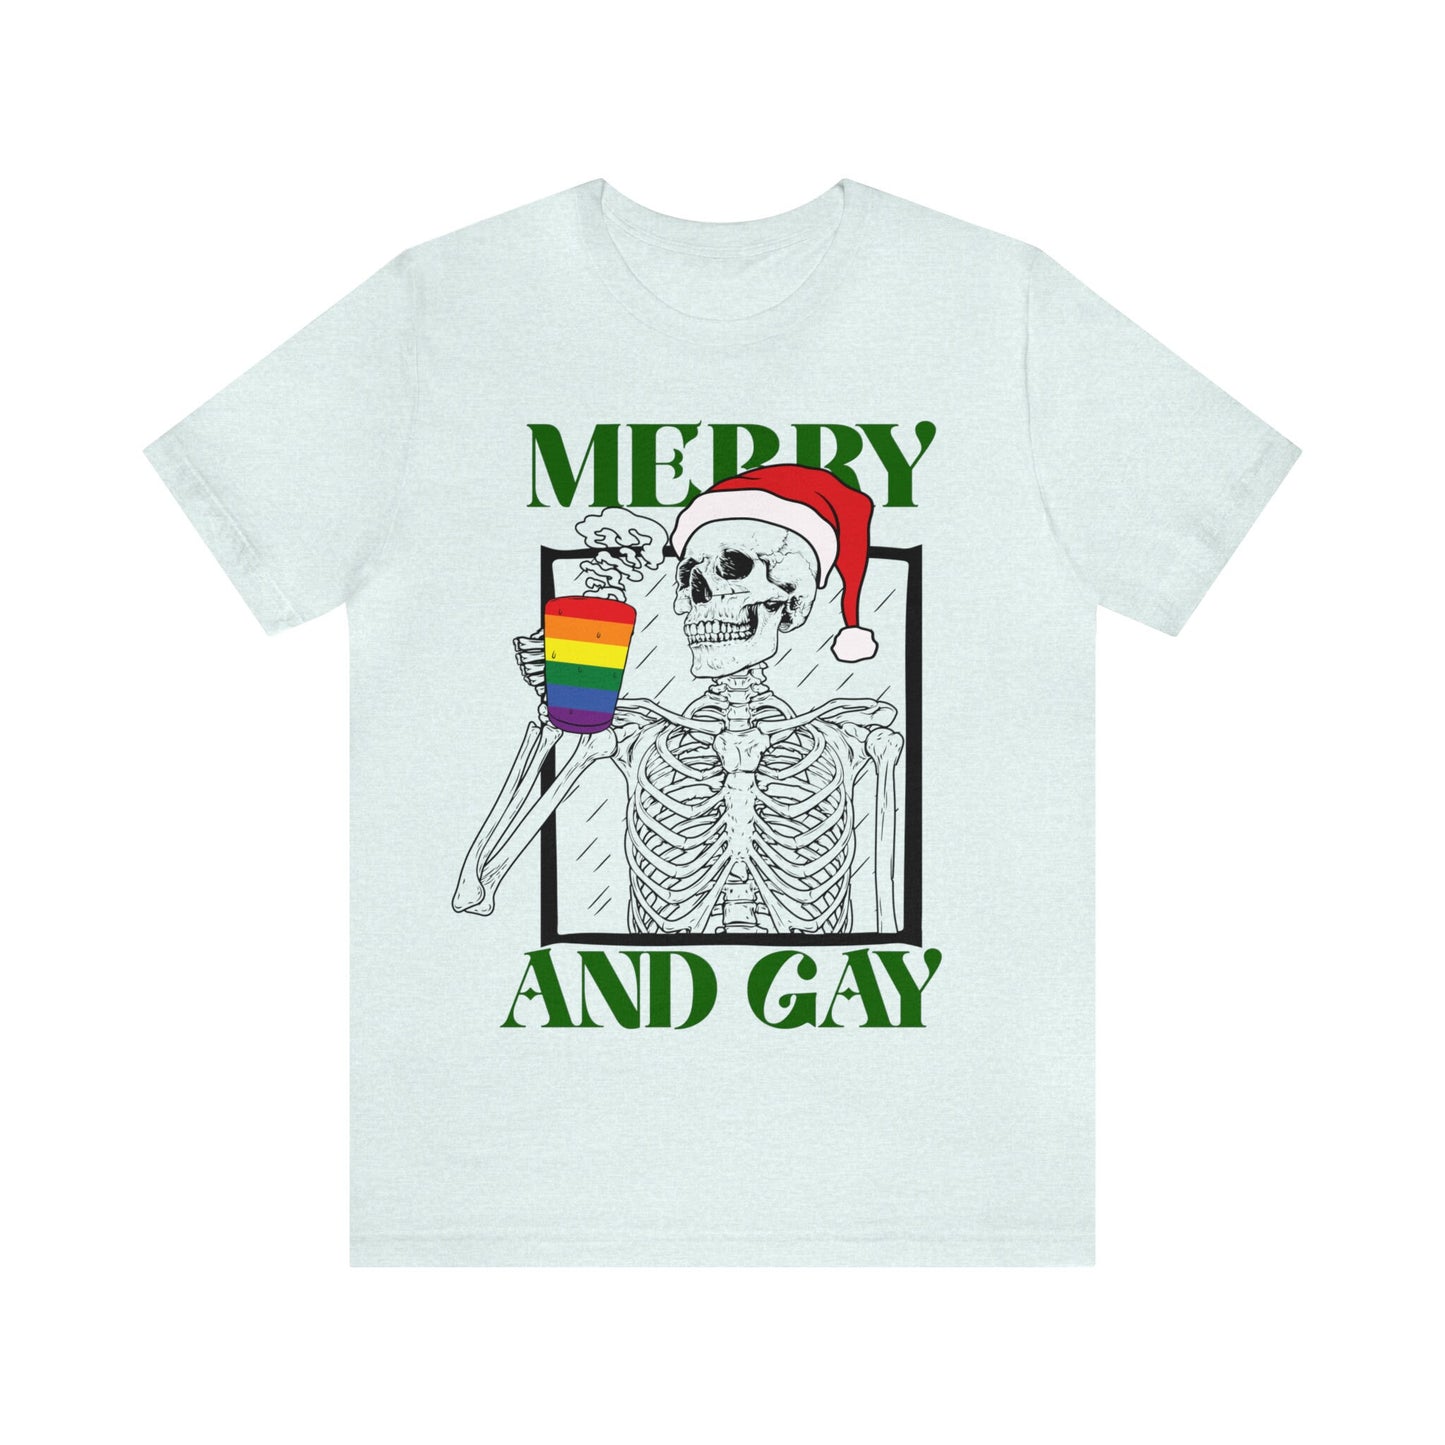 Merry and gay shirt